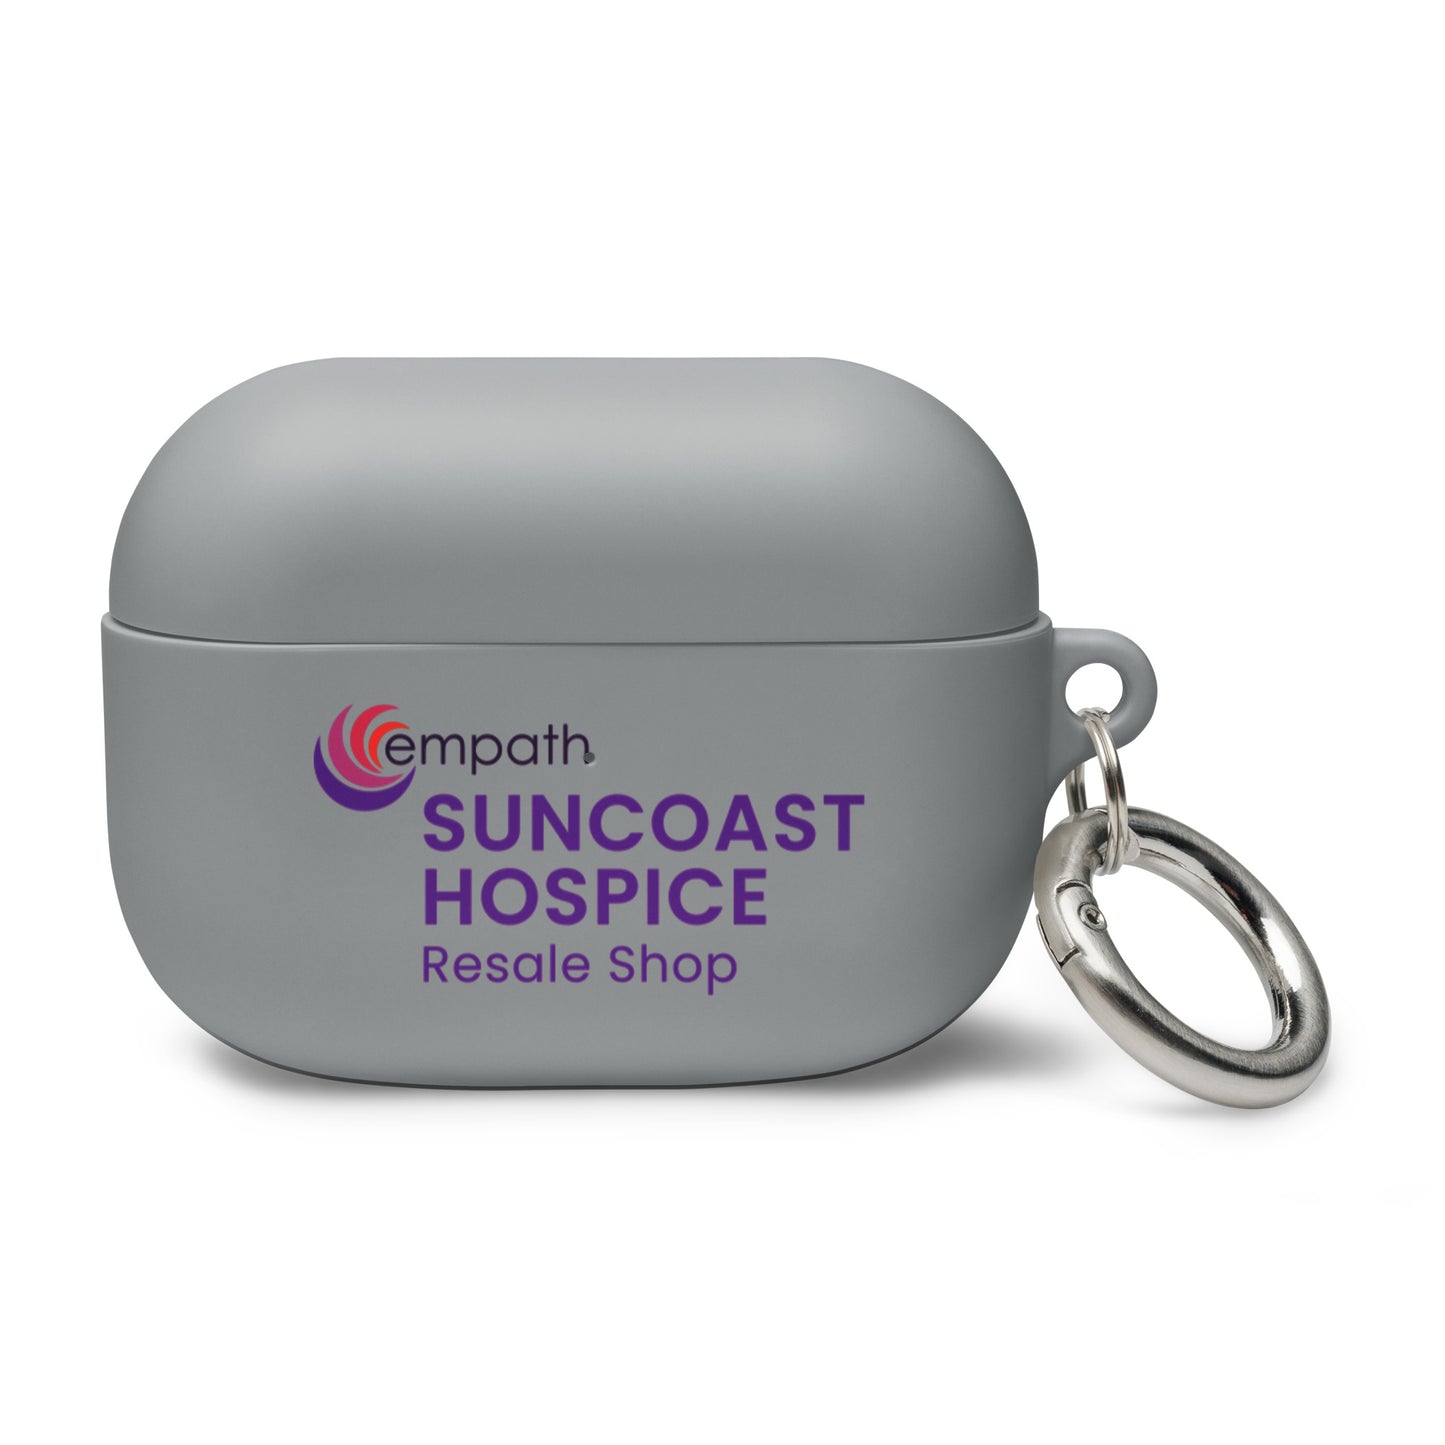 Rubber Case for AirPods® - Suncoast Hospice Resale Shop